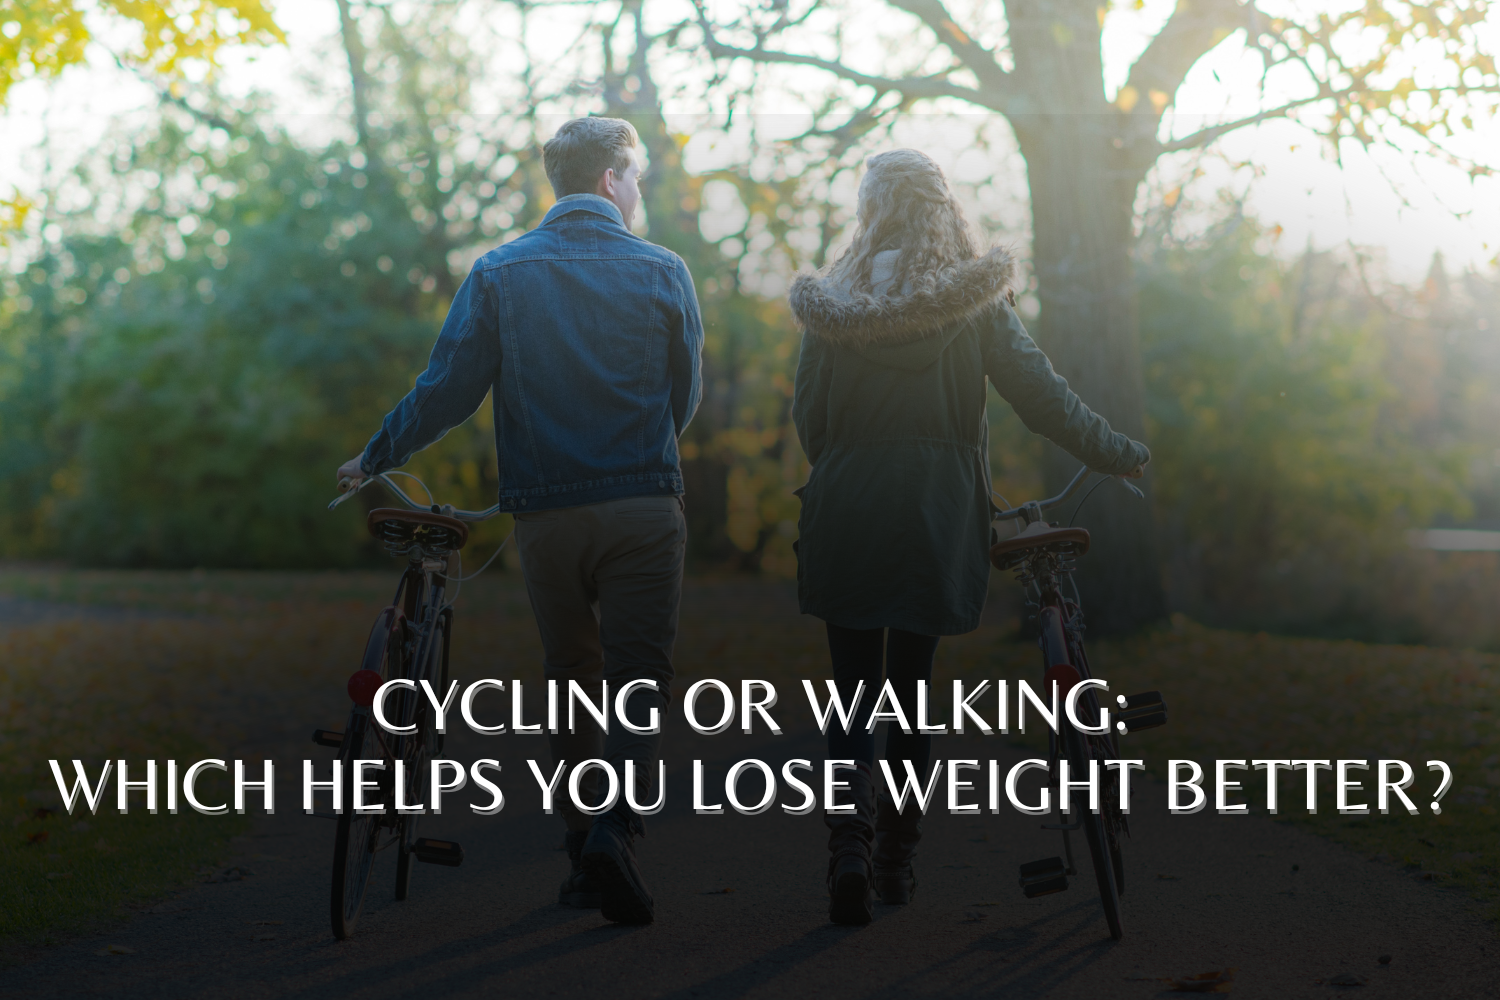 Cycling or Walking: Which Helps You Lose Weight Better?